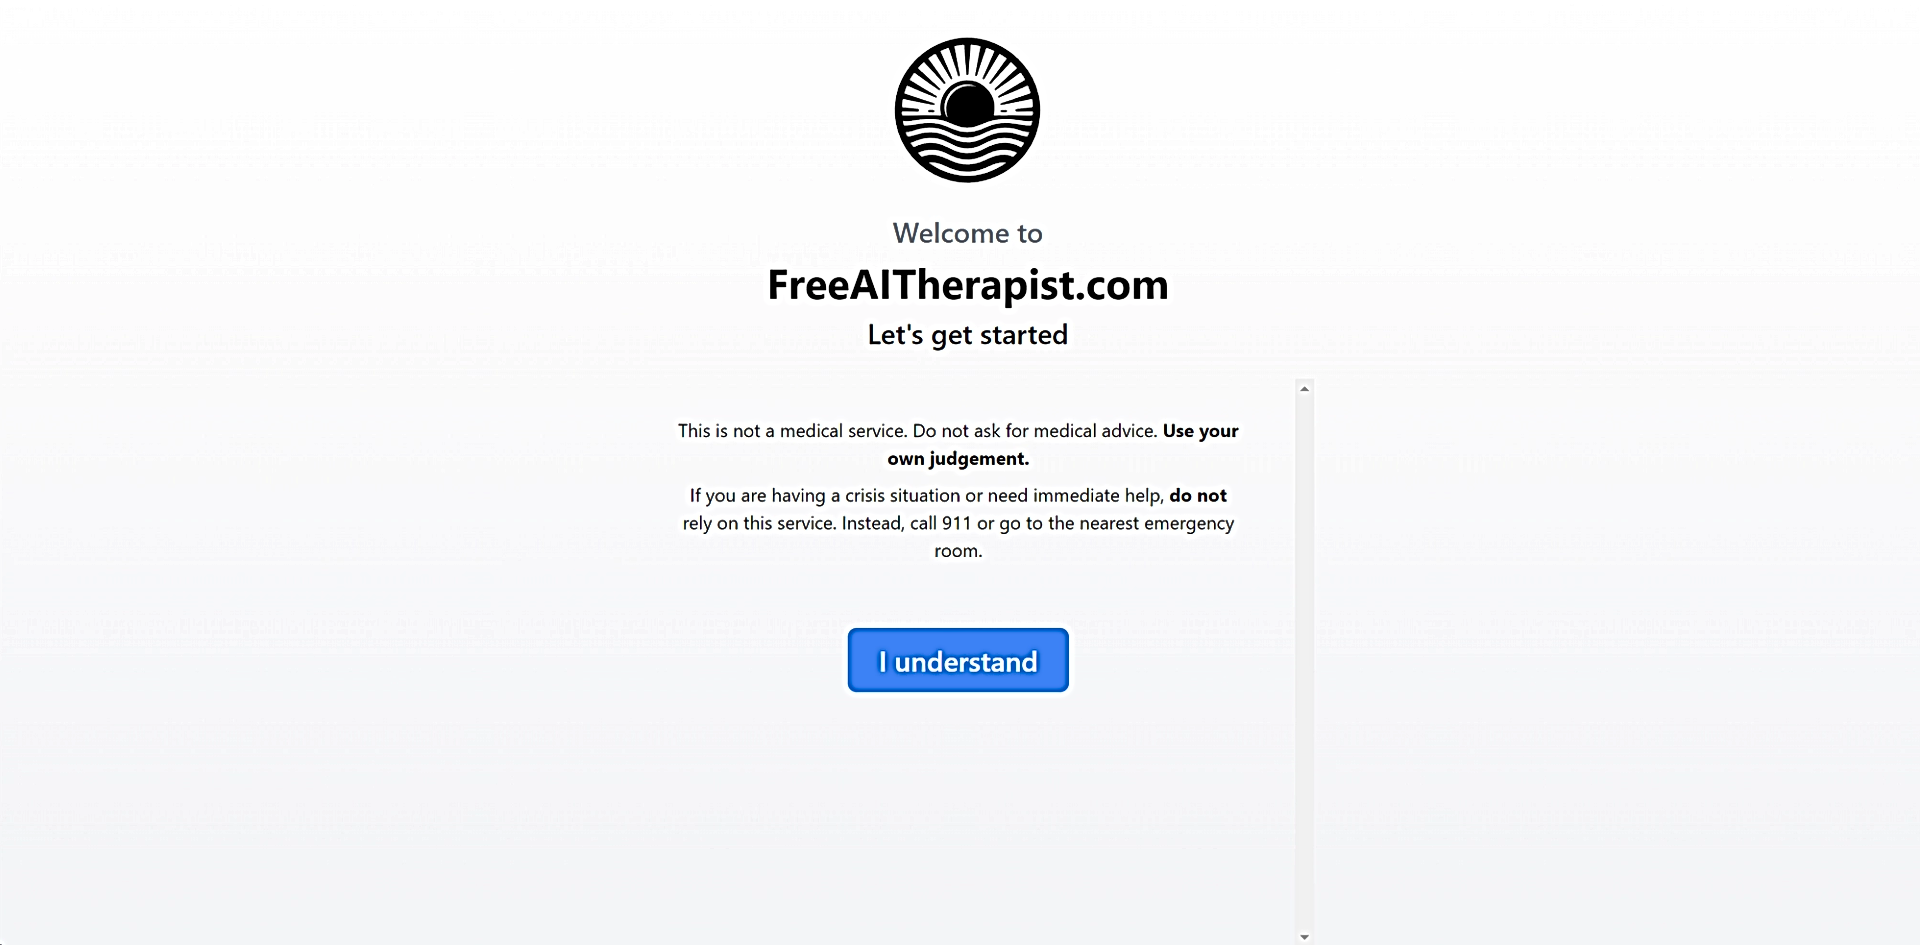 Free AI Therapist featured